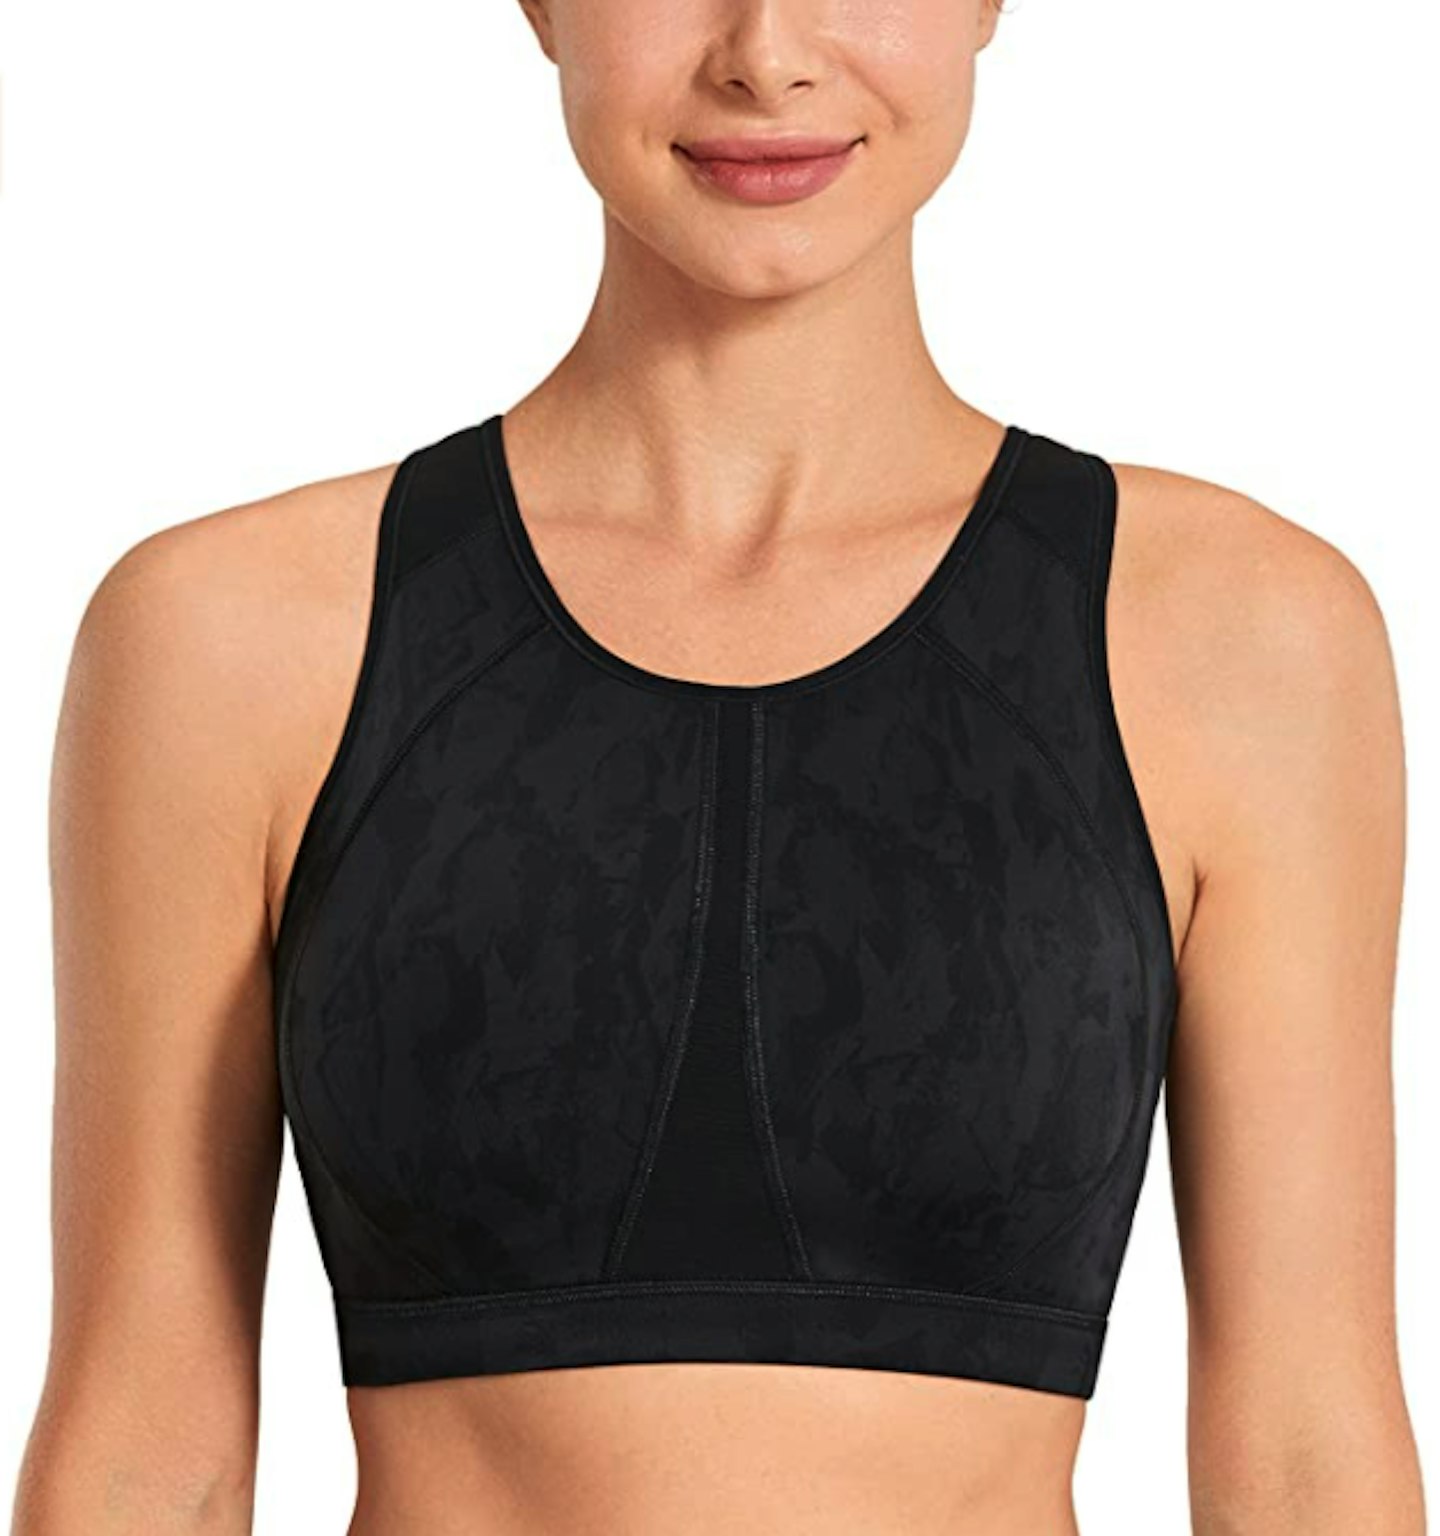 Women's High Impact Padded Supportive Wirefree Full Coverage